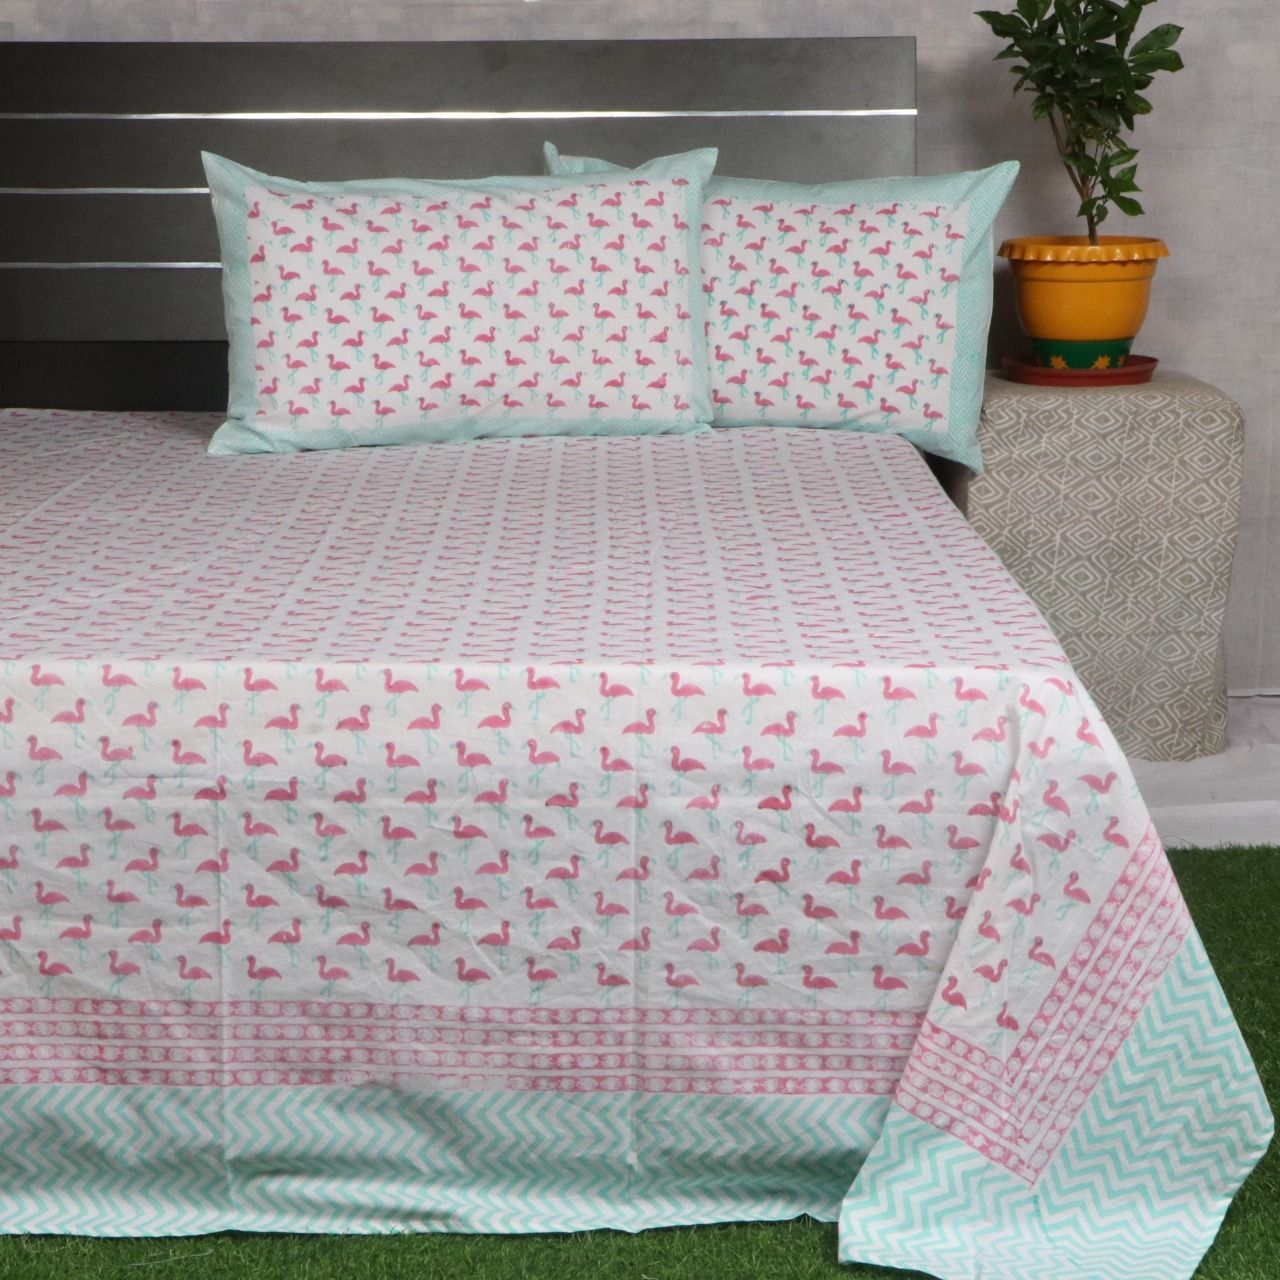 Hand block printed cotton bedsheets